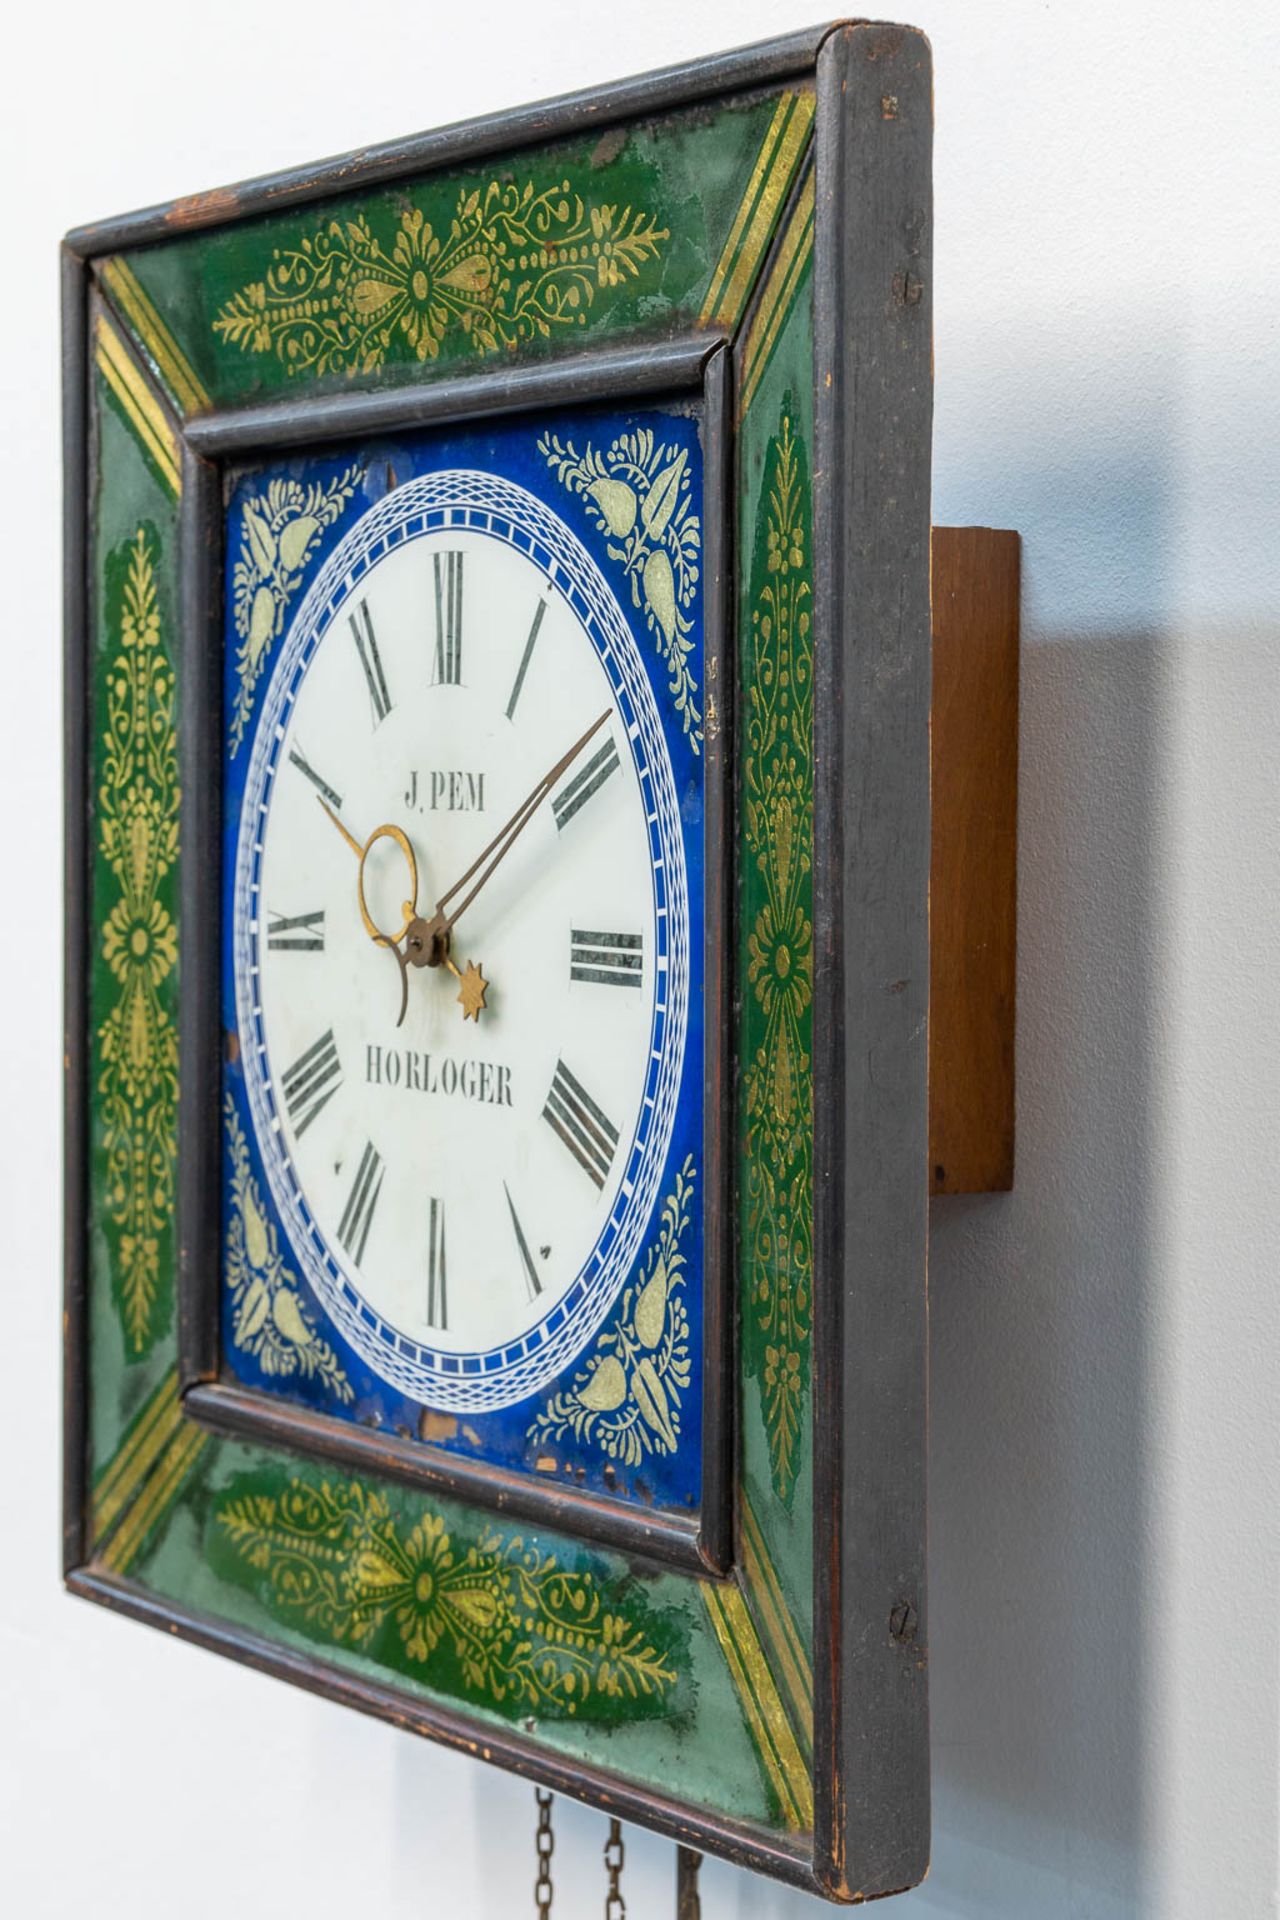 A clock with eglomise reverse glass painting, marked J. Pem Horloger. (12 x 39 x 39 cm) - Image 5 of 8